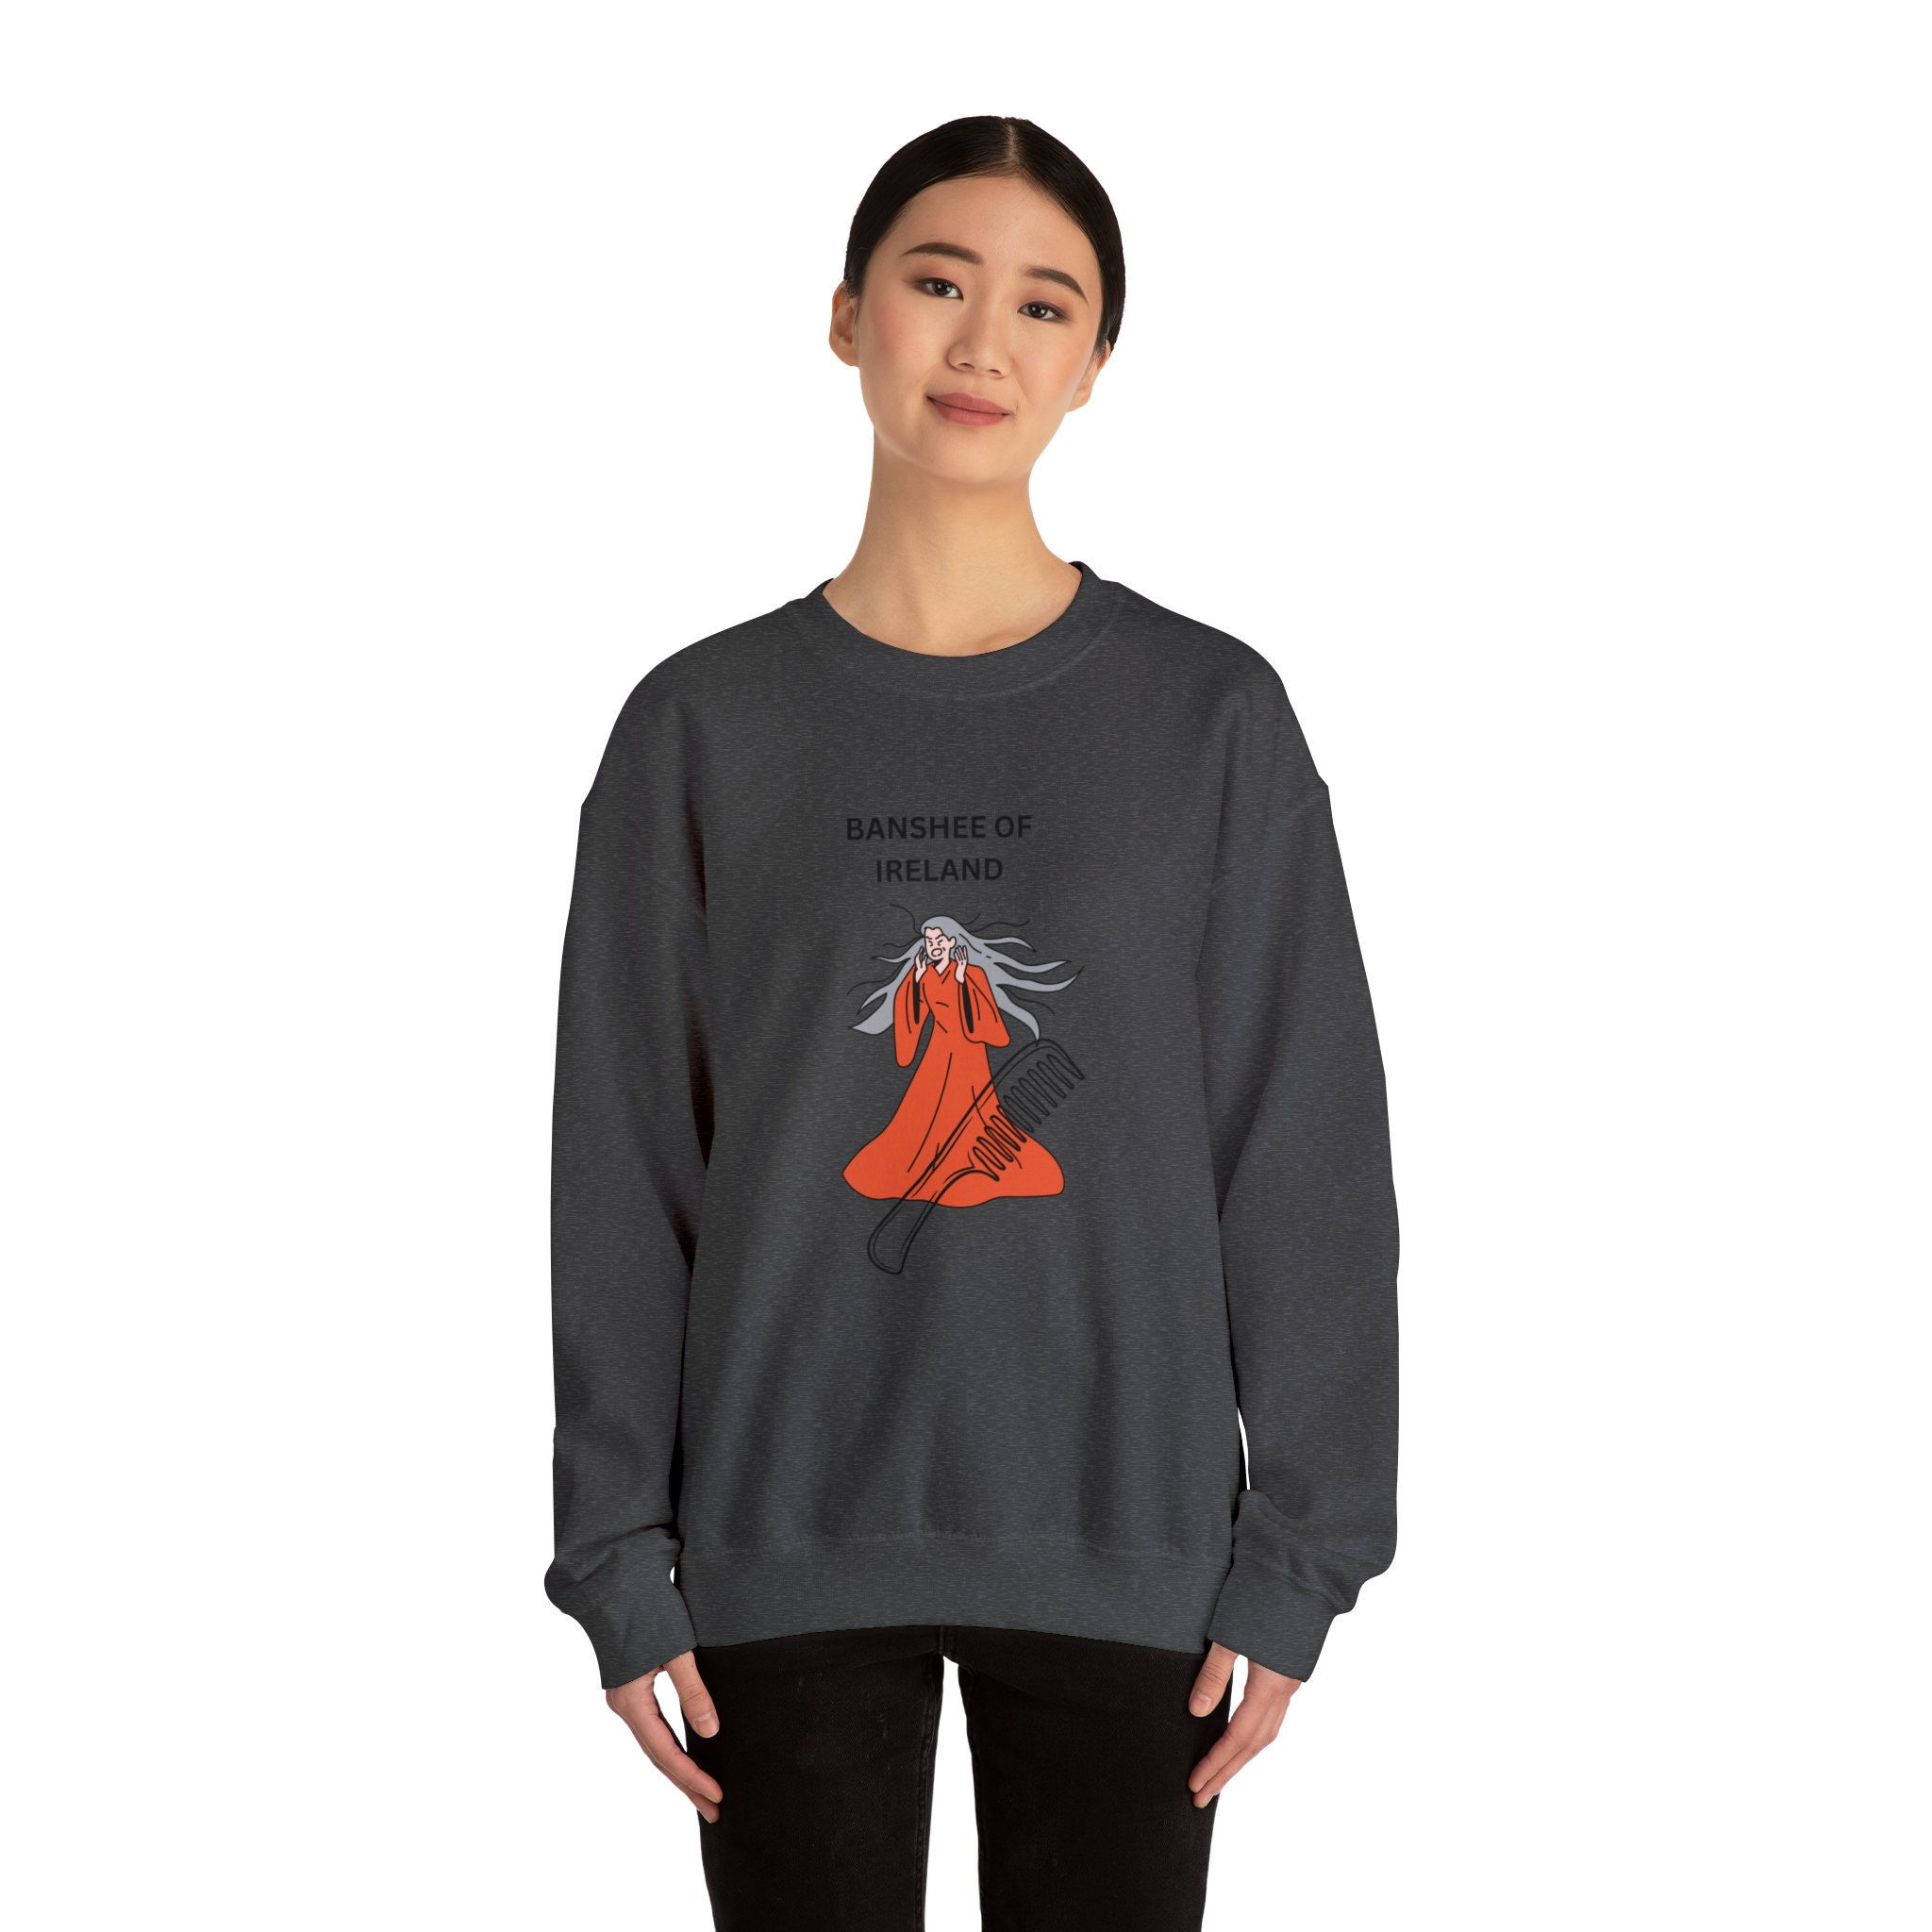 Discover The Banshee is an old spirit from Irish folklore. Perfect for Halloween night or parties. Unisex Heavy Blend Crewneck Sweatshirt